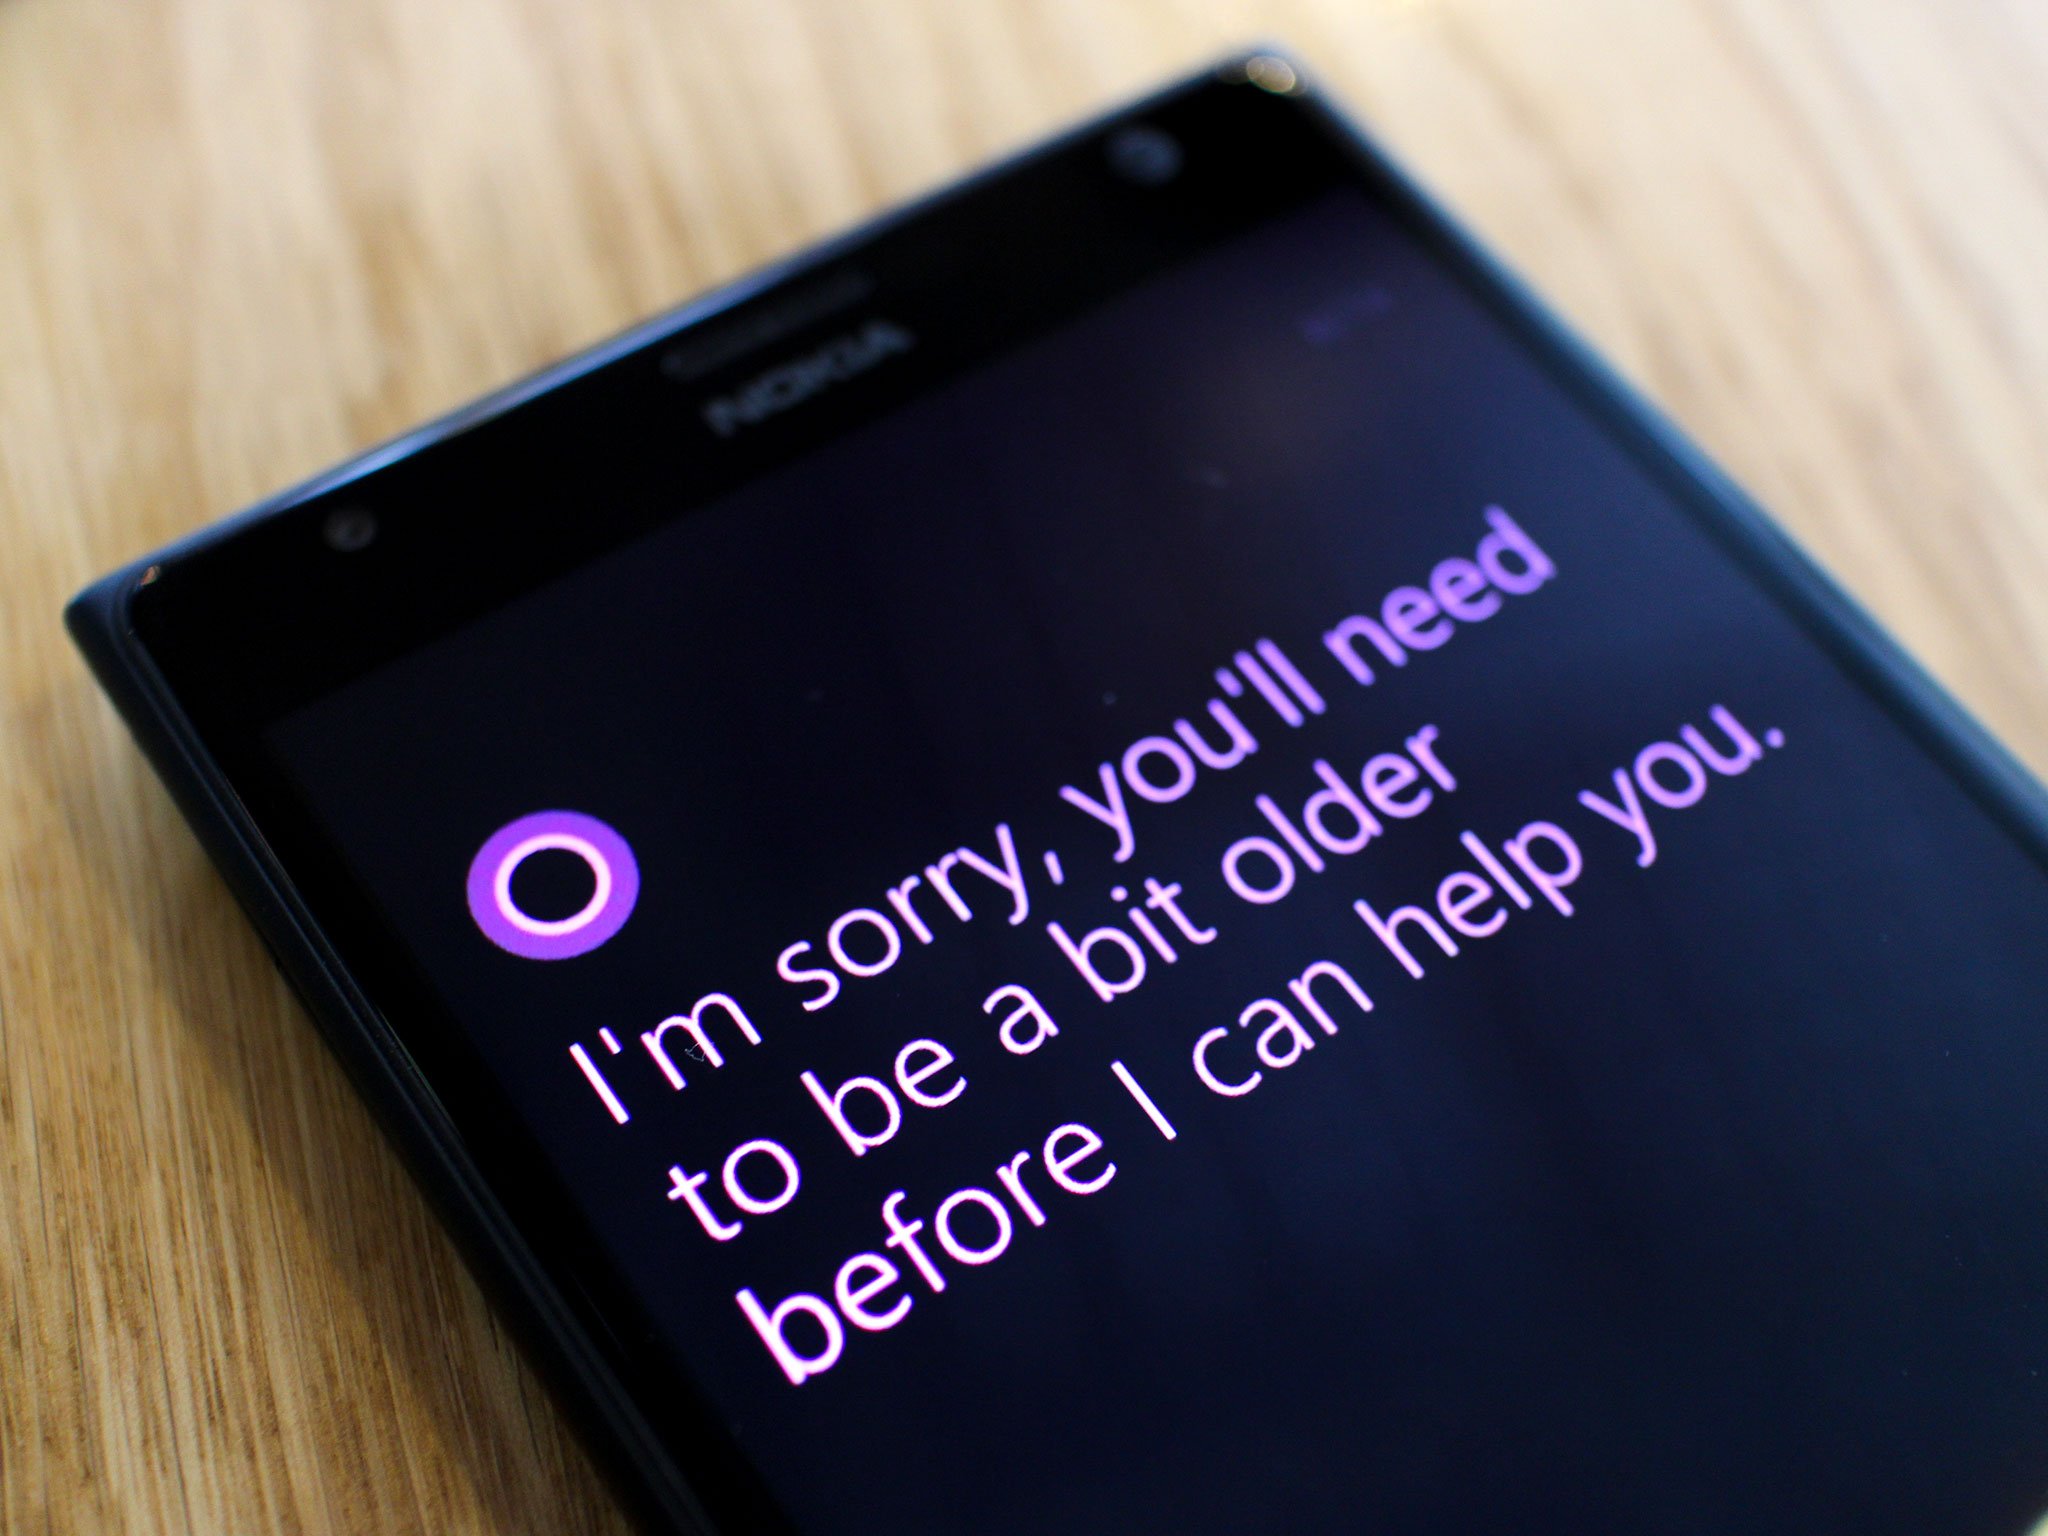 Sorry kids, you must be thirteen or older to use Cortana | Windows Central